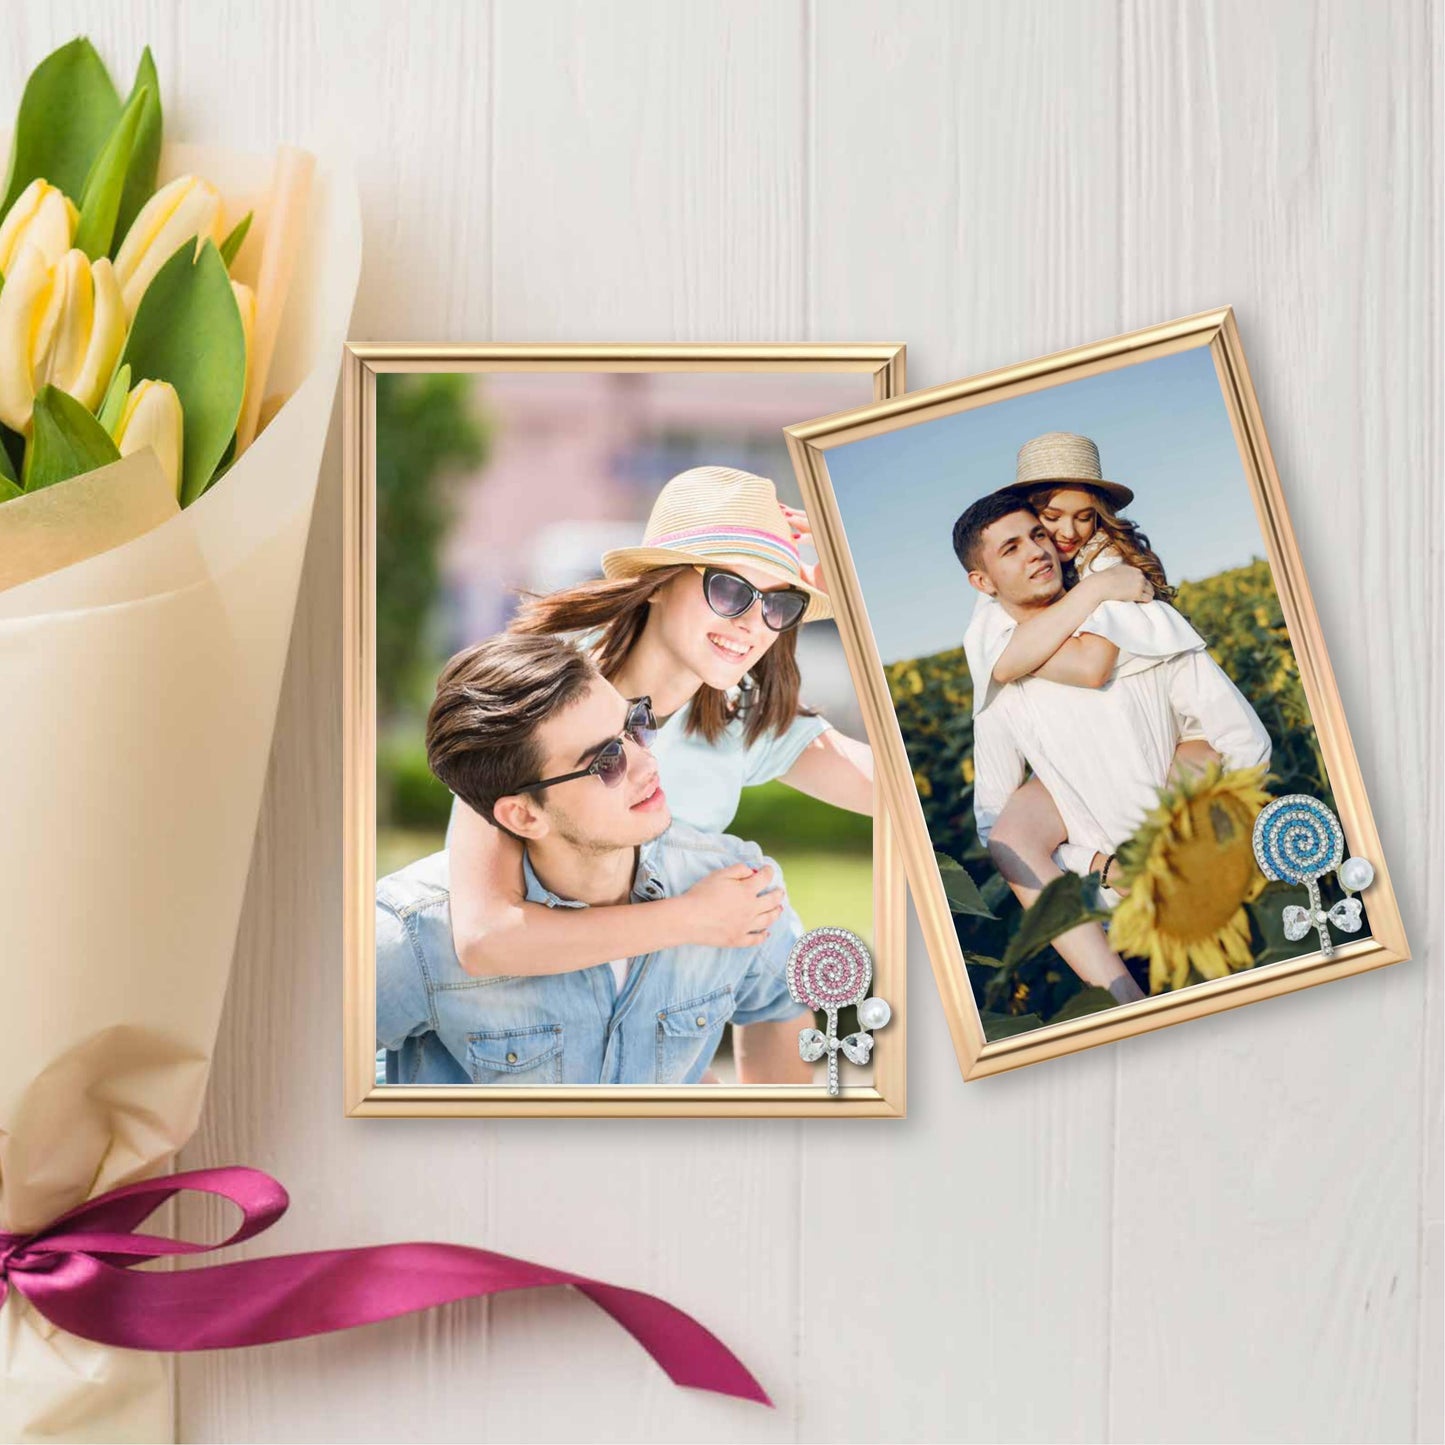 Lollipop Picture Frame Photo Frame Embellished Gift for Wall and Tabletop Display (5x7 Golden, and 4x6, Golden)